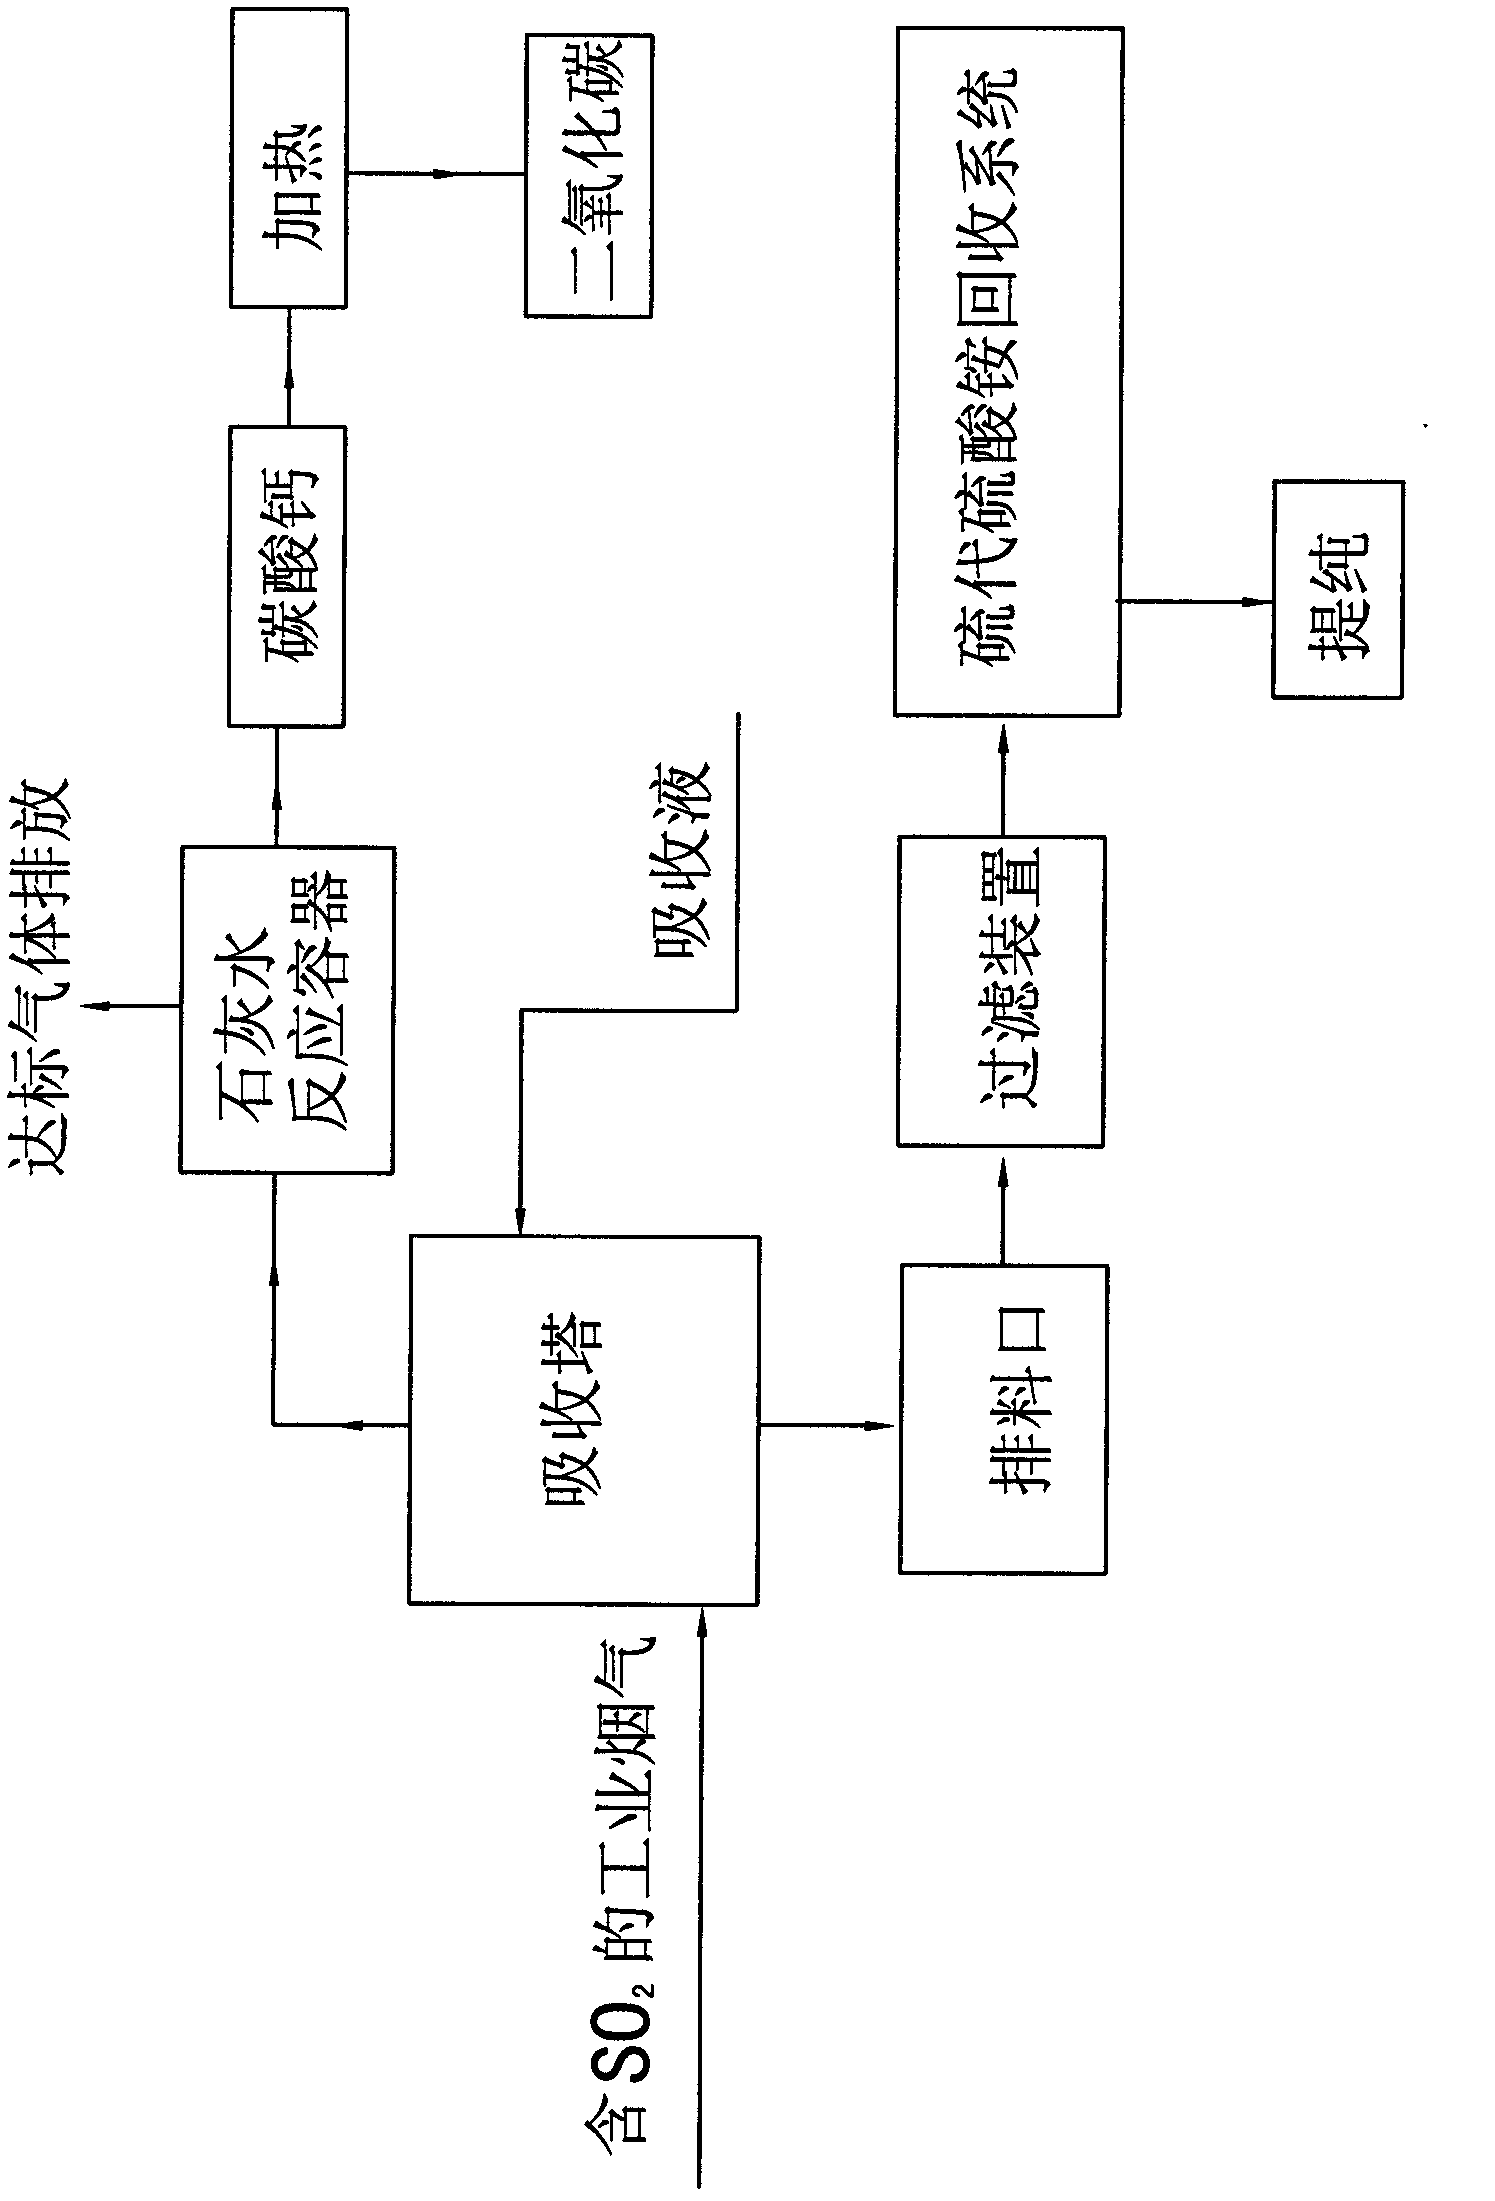 Method for producing thiosulfate and recovering carbon dioxide by utilizing industrial flue gas